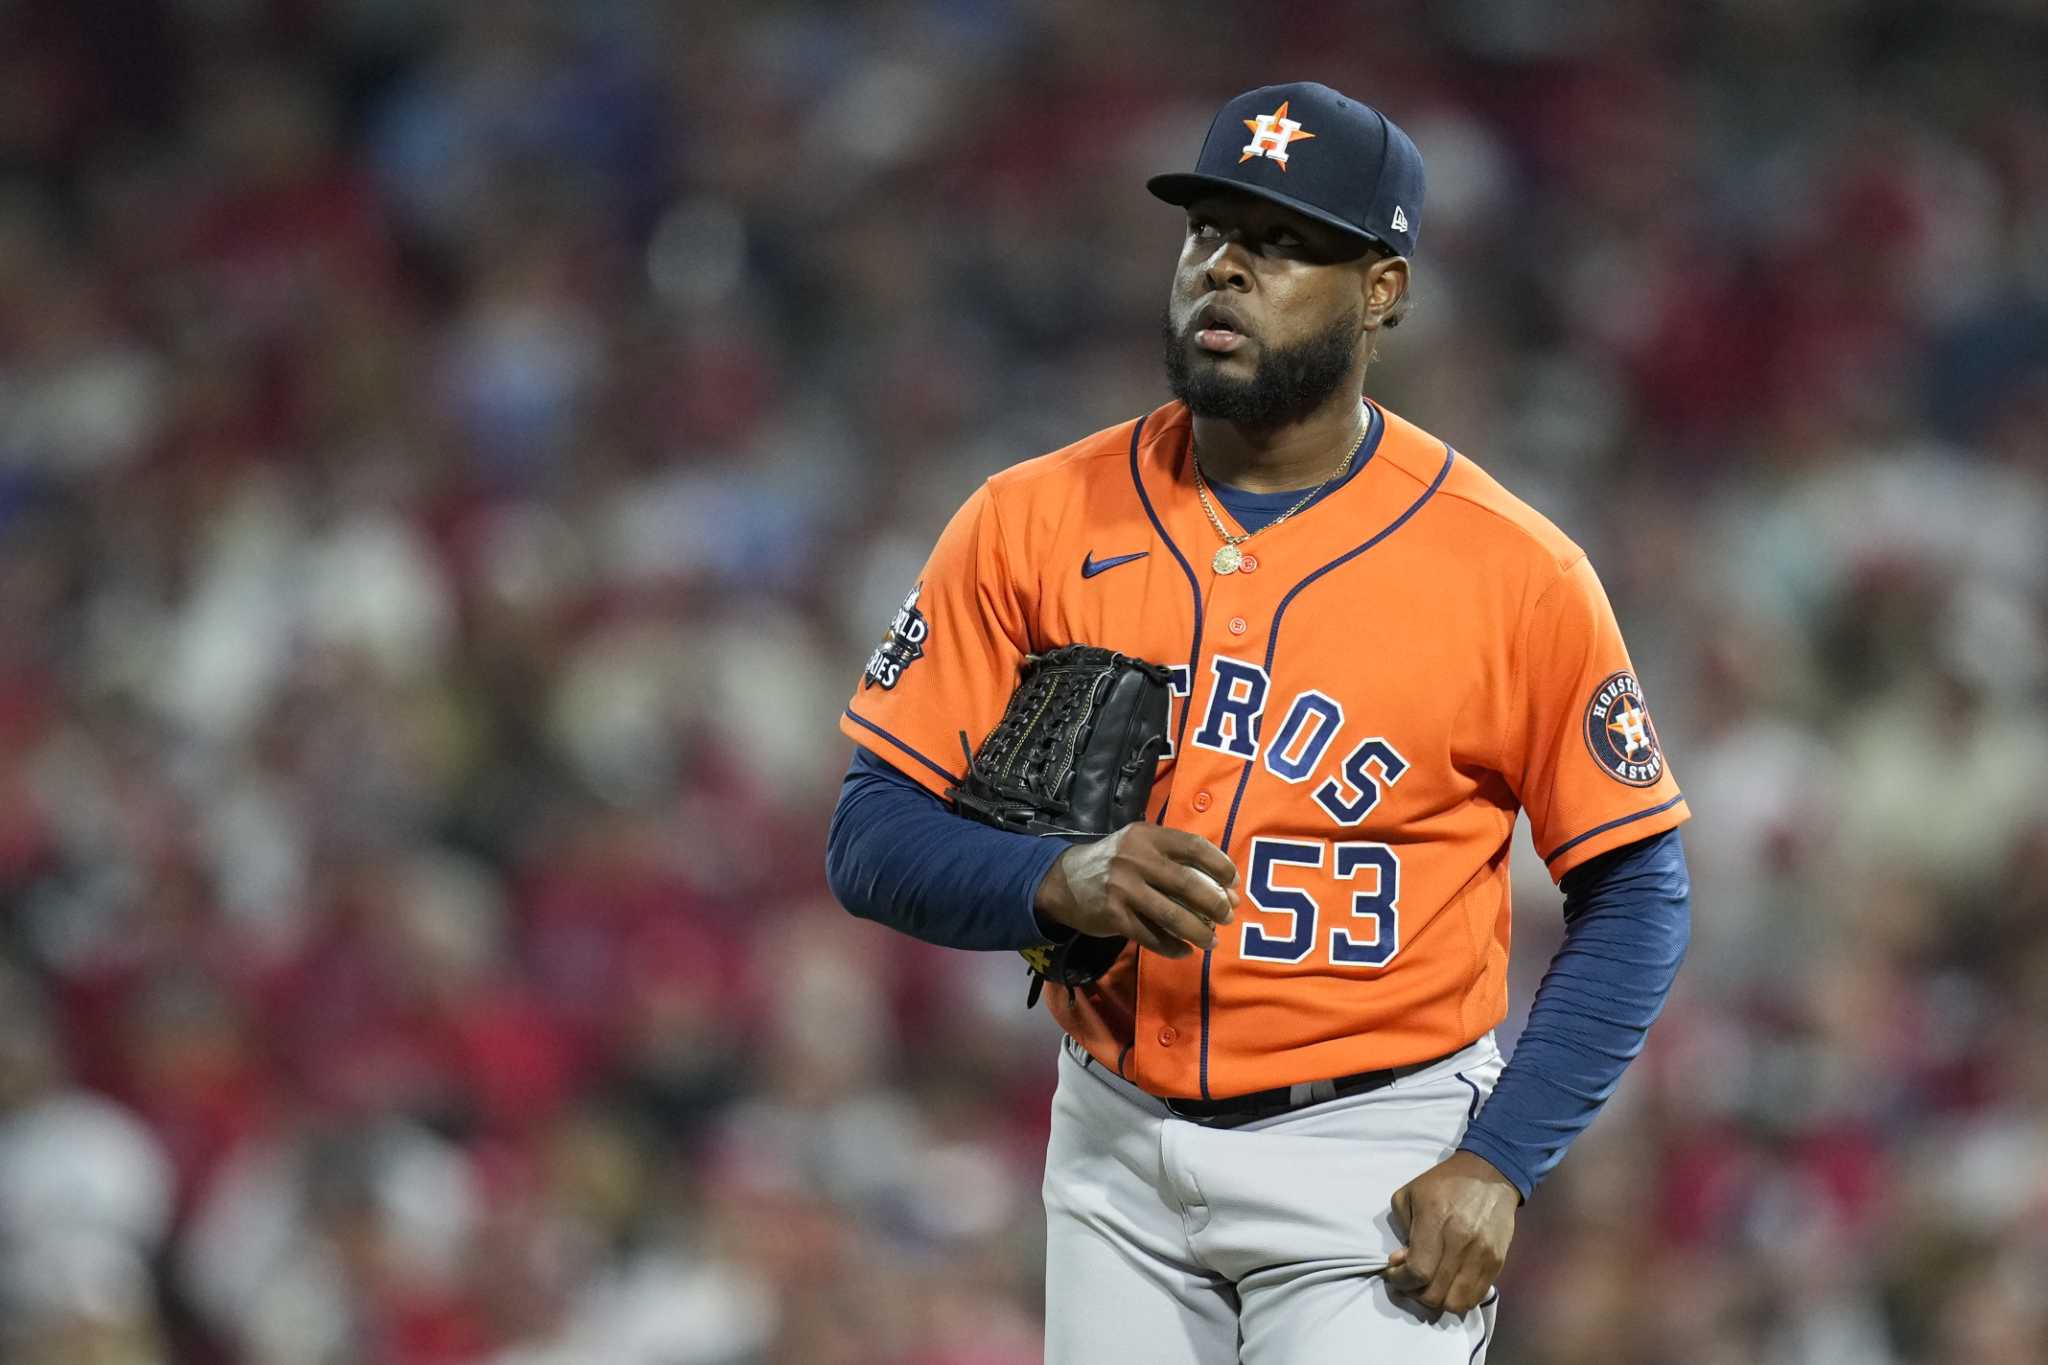 Astros-Phillies updates: Astros throw combined no-hitter